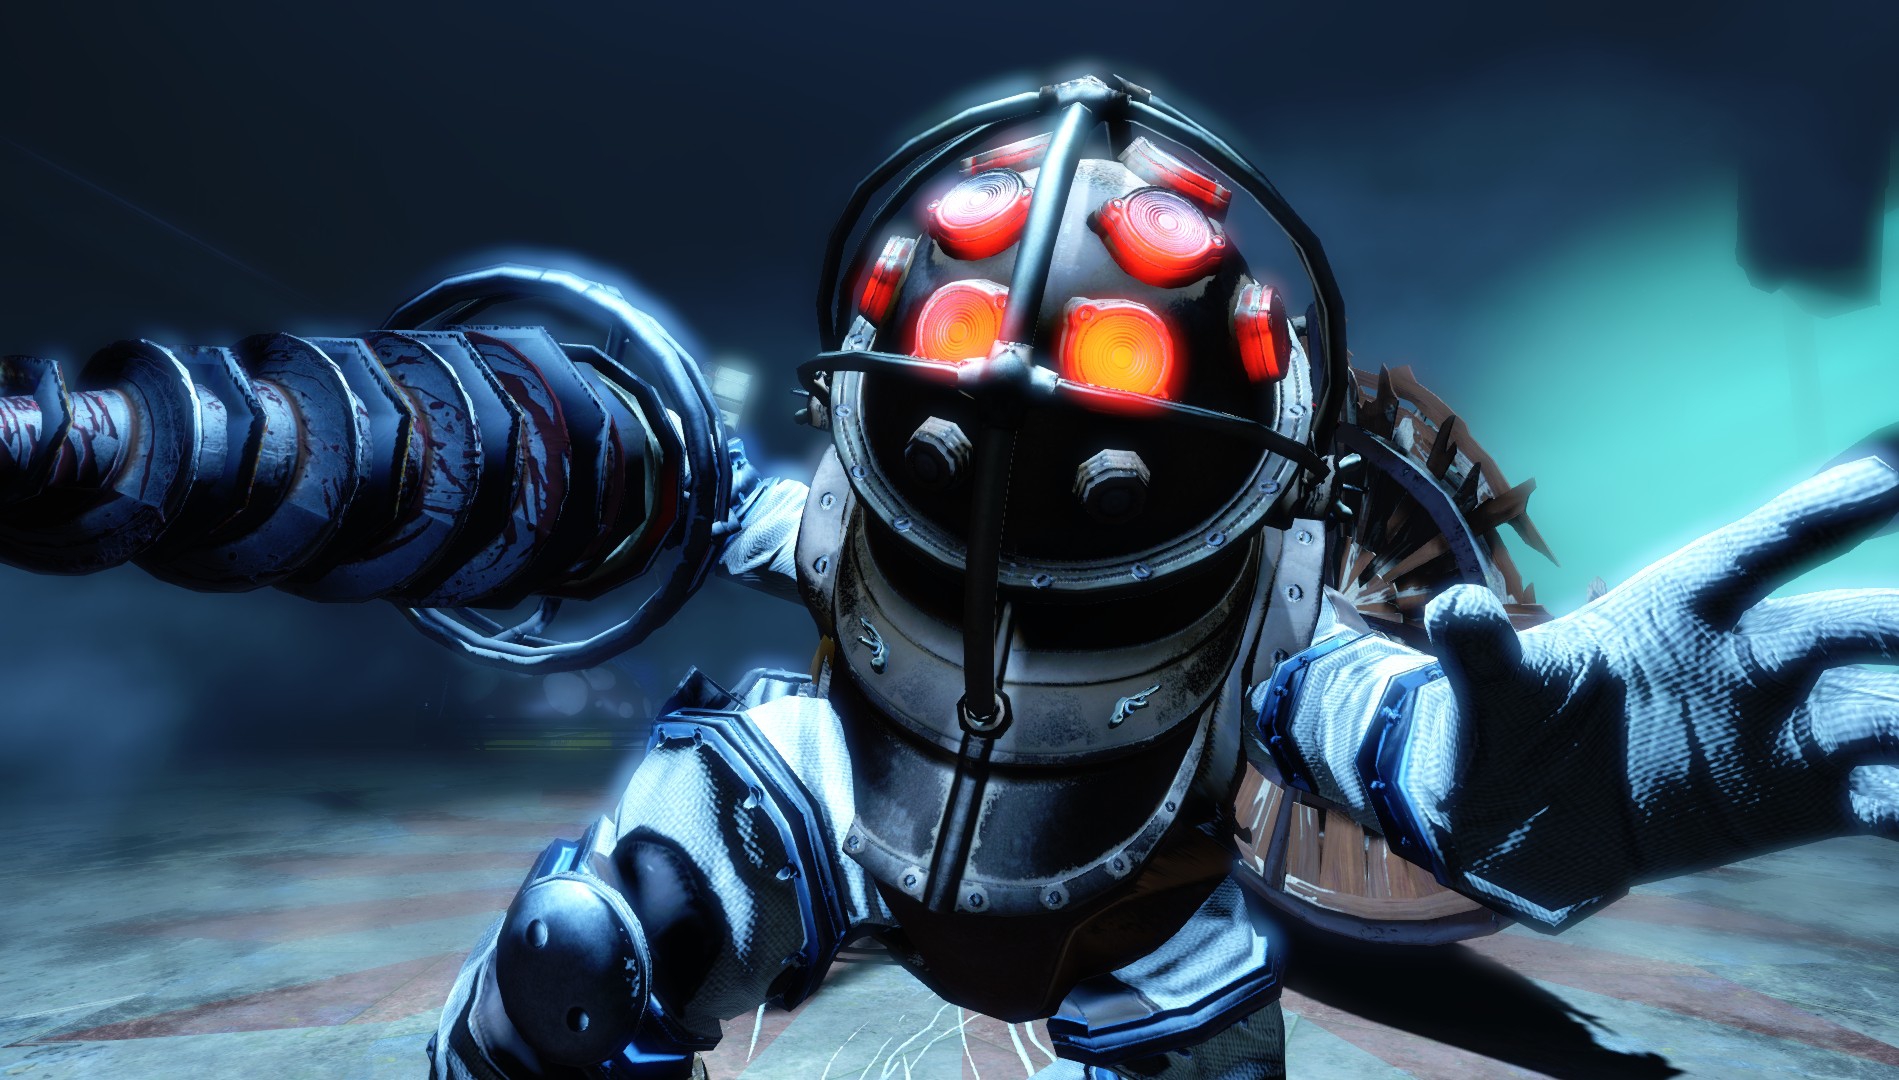 BioShock Infinite: Burial at Sea 2 delivers a scrappy end to the saga -  opinion